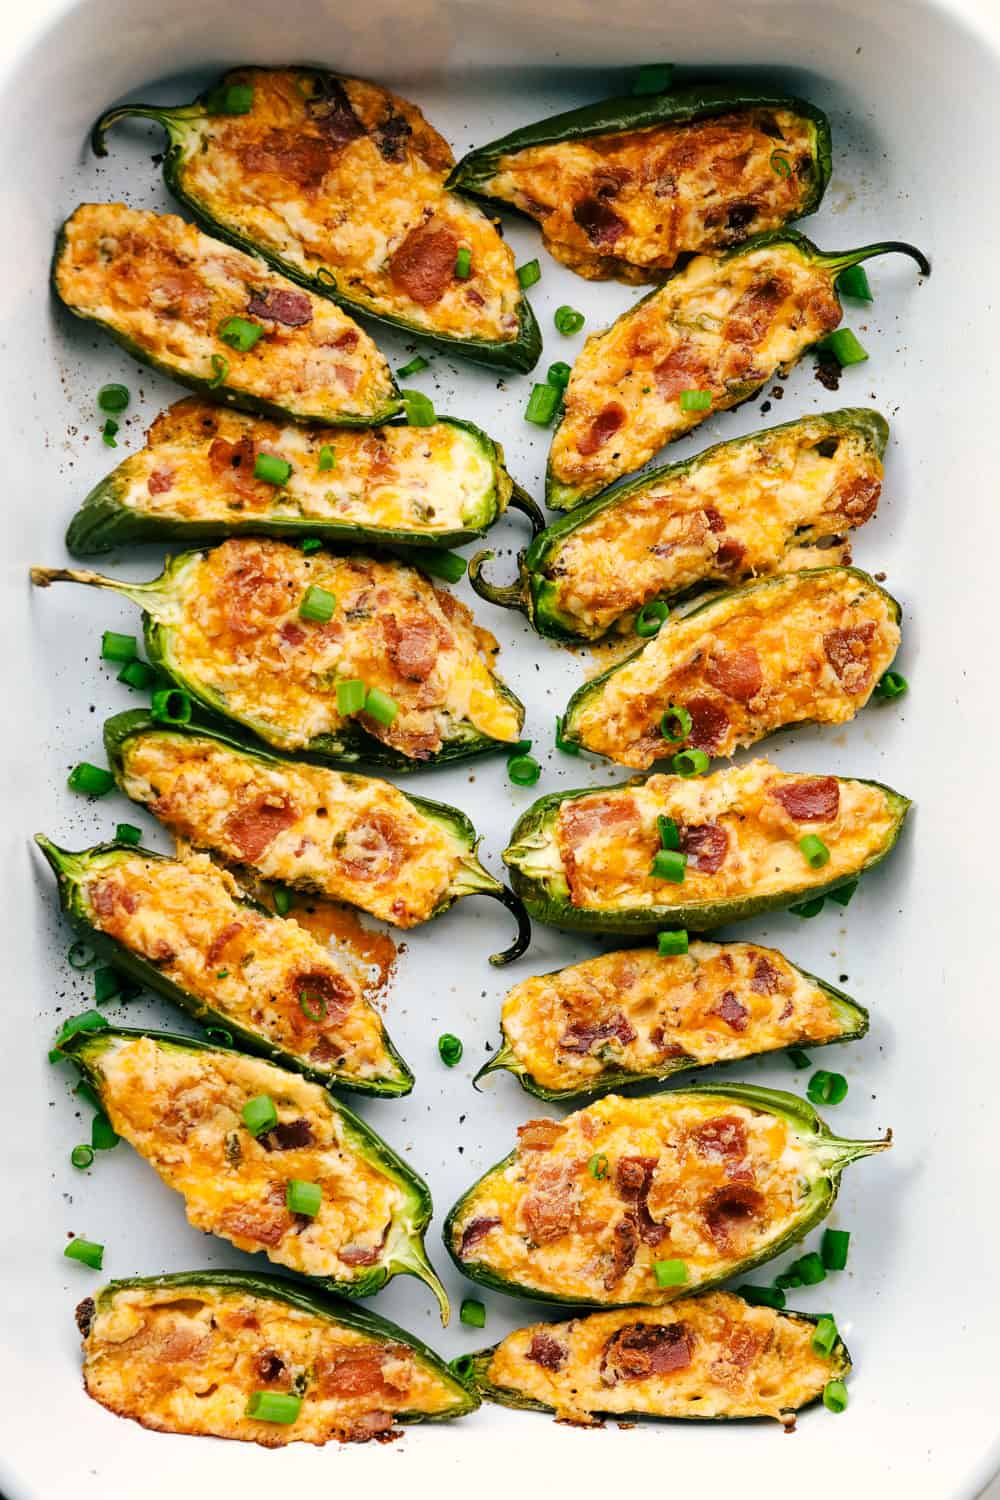 The Best Jalapeno Popper Recipe How To Make Jalapeno Poppers,Hydrangeas In Vase